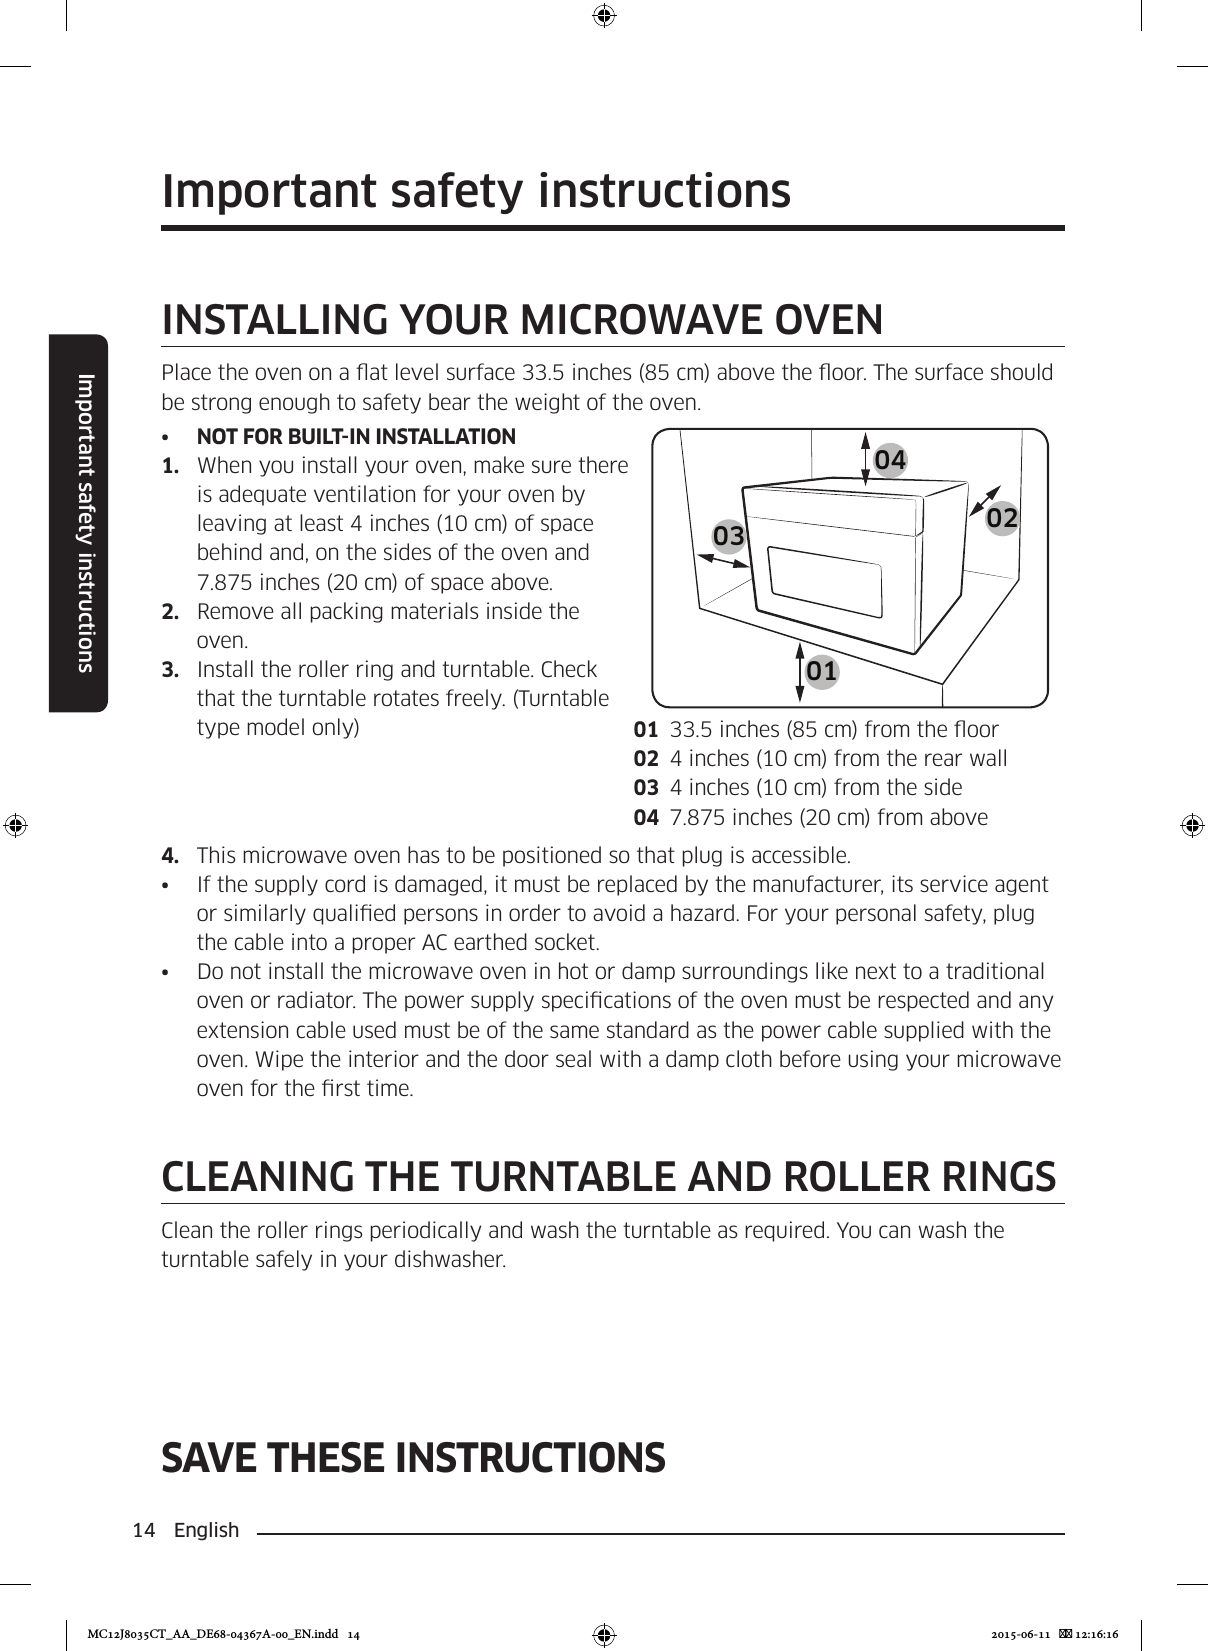 14 EnglishImportant safety instructionsSAVE THESE INSTRUCTIONSImportant safety instructionsINSTALLING YOUR MICROWAVE OVENPlace the oven on a at level surface 33.5 inches (85 cm) above the oor. The surface should be strong enough to safety bear the weight of the oven.•  NOT FOR BUILT-IN INSTALLATION1.  When you install your oven, make sure there is adequate ventilation for your oven by leaving at least 4 inches (10 cm) of space behind and, on the sides of the oven and 7.875 inches (20 cm) of space above.2.  Remove all packing materials inside the oven.3.  Install the roller ring and turntable. Check that the turntable rotates freely. (Turntable type model only)010403 0201  33.5 inches (85 cm) from the oor02  4 inches (10 cm) from the rear wall03  4 inches (10 cm) from the side04  7.875 inches (20 cm) from above4.  This microwave oven has to be positioned so that plug is accessible.•  If the supply cord is damaged, it must be replaced by the manufacturer, its service agent or similarly qualied persons in order to avoid a hazard. For your personal safety, plug the cable into a proper AC earthed socket.•  Do not install the microwave oven in hot or damp surroundings like next to a traditional oven or radiator. The power supply specications of the oven must be respected and any extension cable used must be of the same standard as the power cable supplied with the oven. Wipe the interior and the door seal with a damp cloth before using your microwave oven for the rst time.CLEANING THE TURNTABLE AND ROLLER RINGSClean the roller rings periodically and wash the turntable as required. You can wash the turntable safely in your dishwasher.MC12J8035CT_AA_DE68-04367A-00_EN.indd   14 2015-06-11    12:16:16